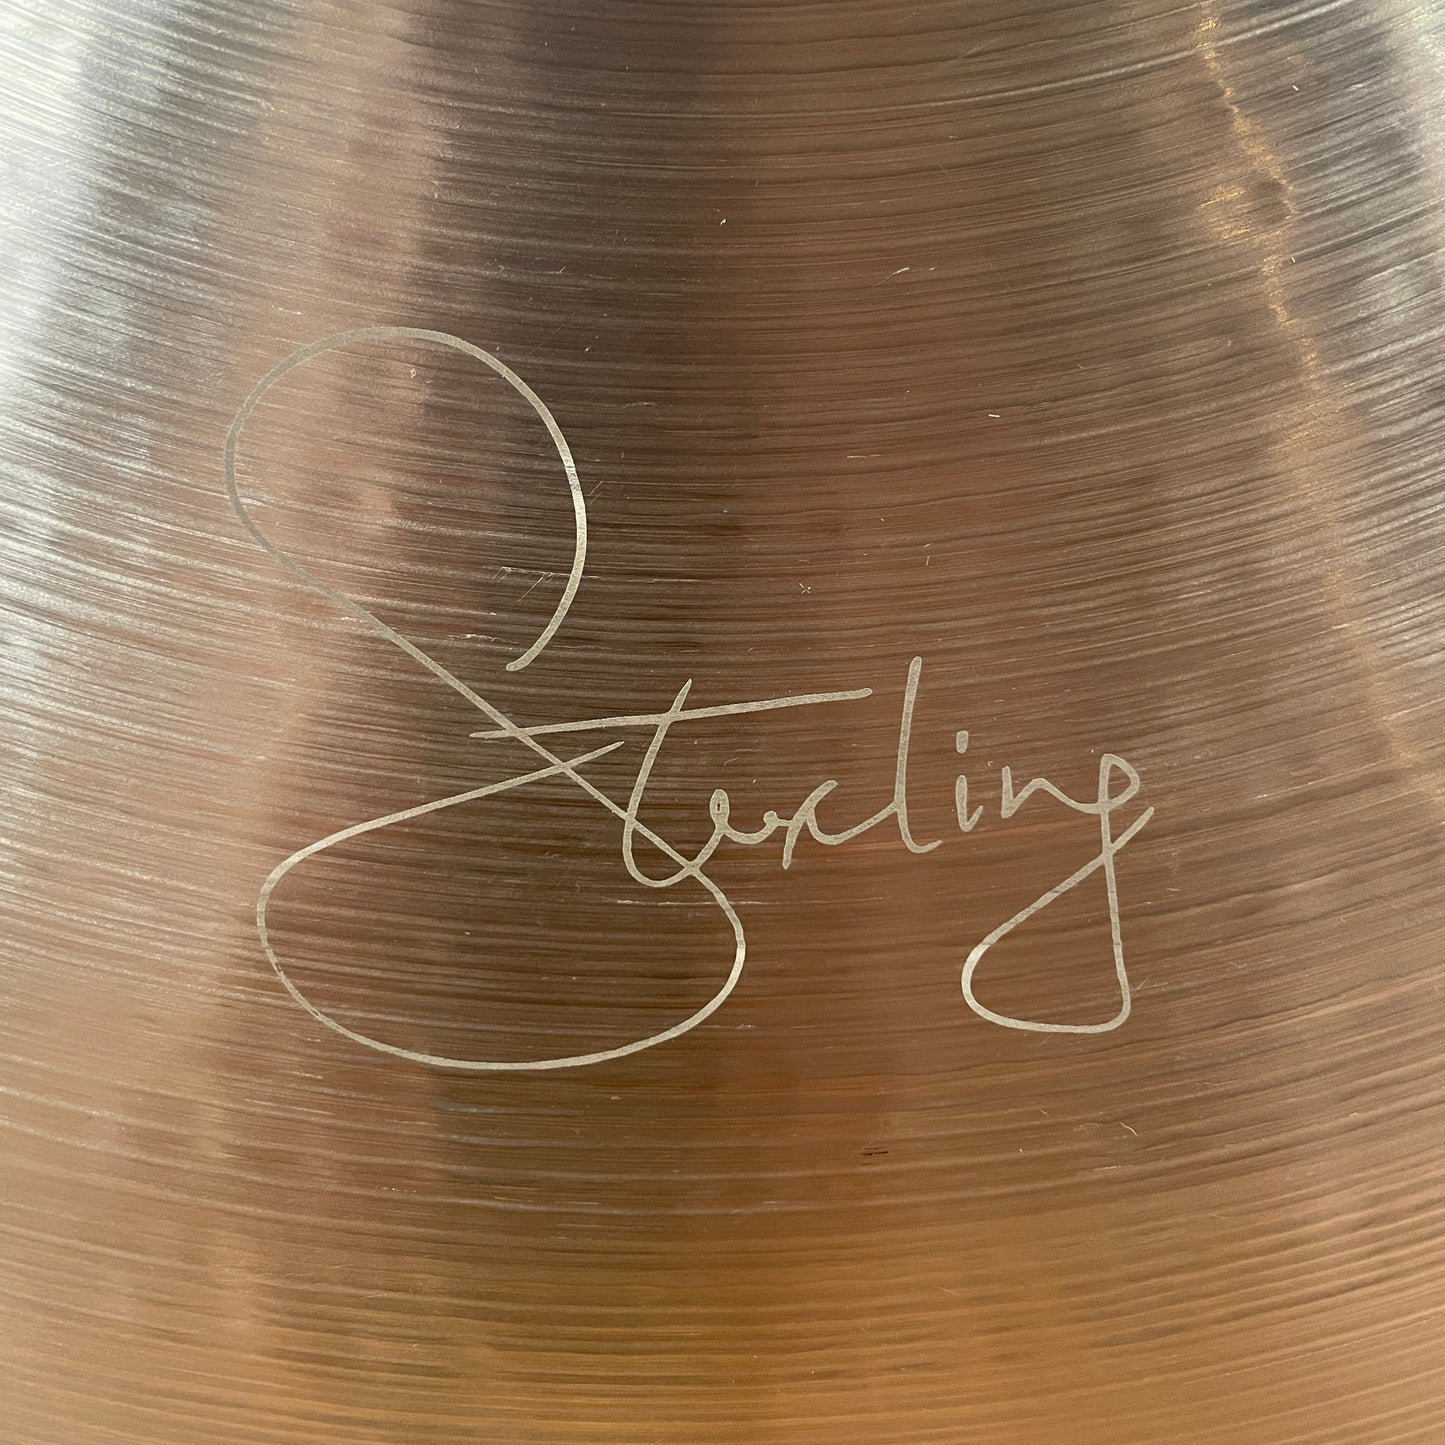 22" Istanbul Agop Sterling Crash Ride Cymbal 2810g *Video Demo*